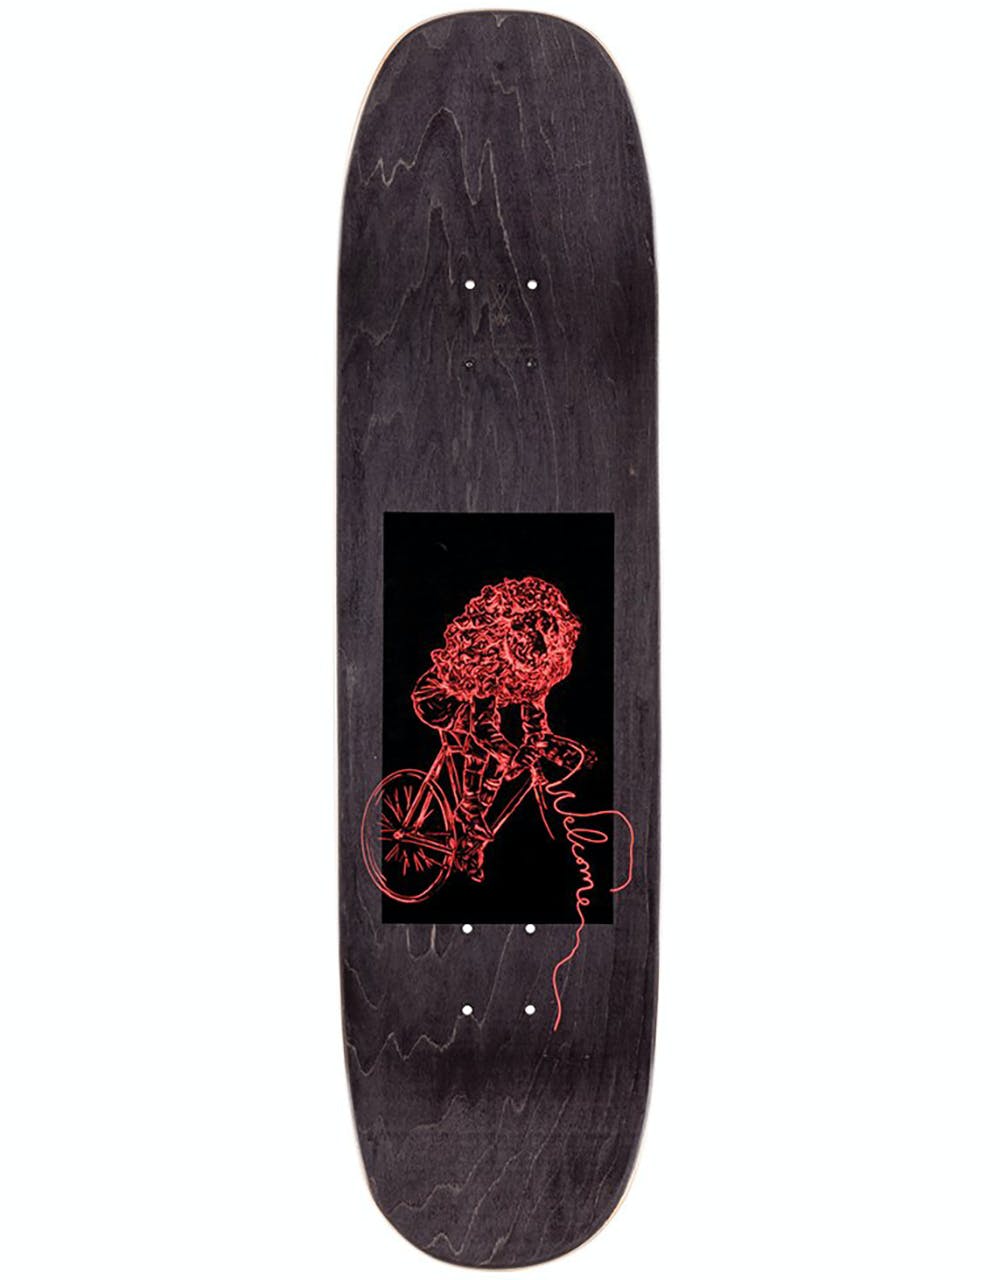 Welcome Squizard on Moontrimmer 2.0 Skateboard Deck - 8.5"